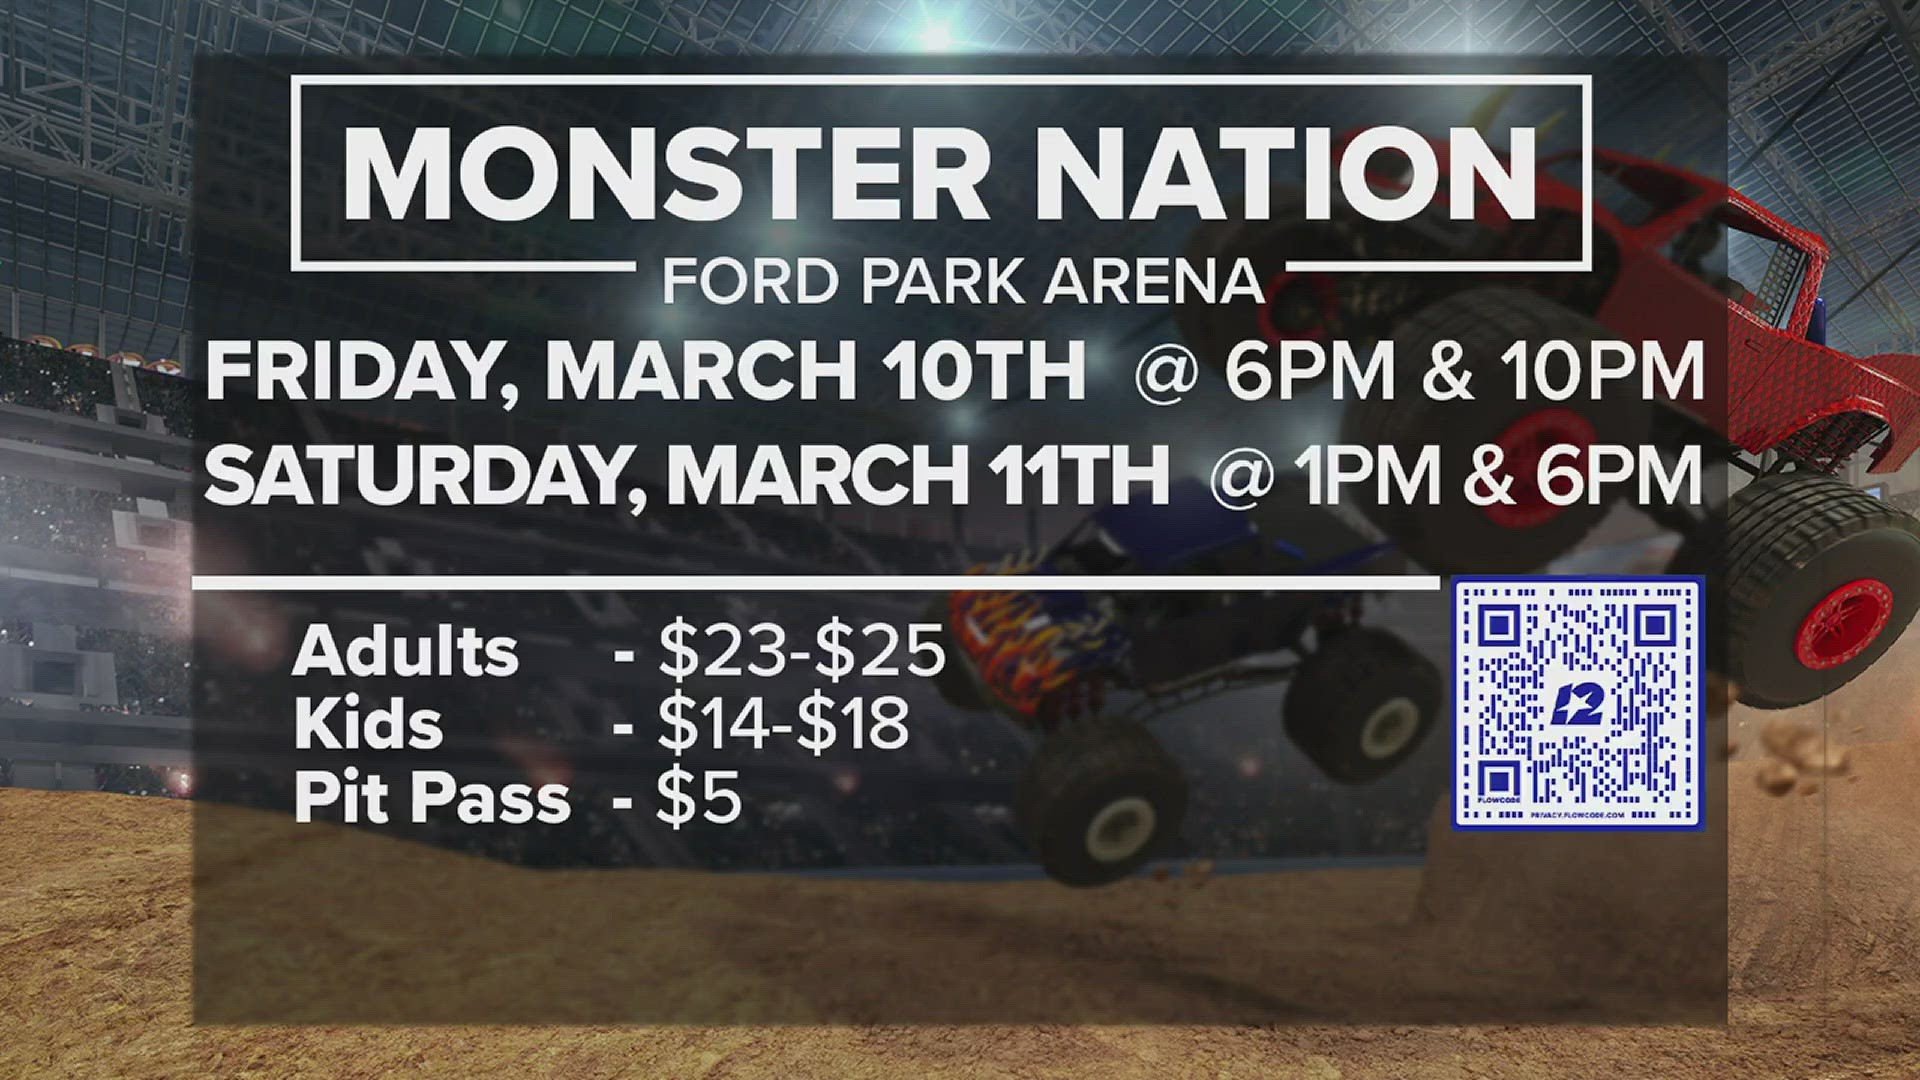 The rumble is going to feature six 10,000 pound monster trucks. Monster truck "Dirt Crew" is looking to defend the monster nation freestyle and racing title.